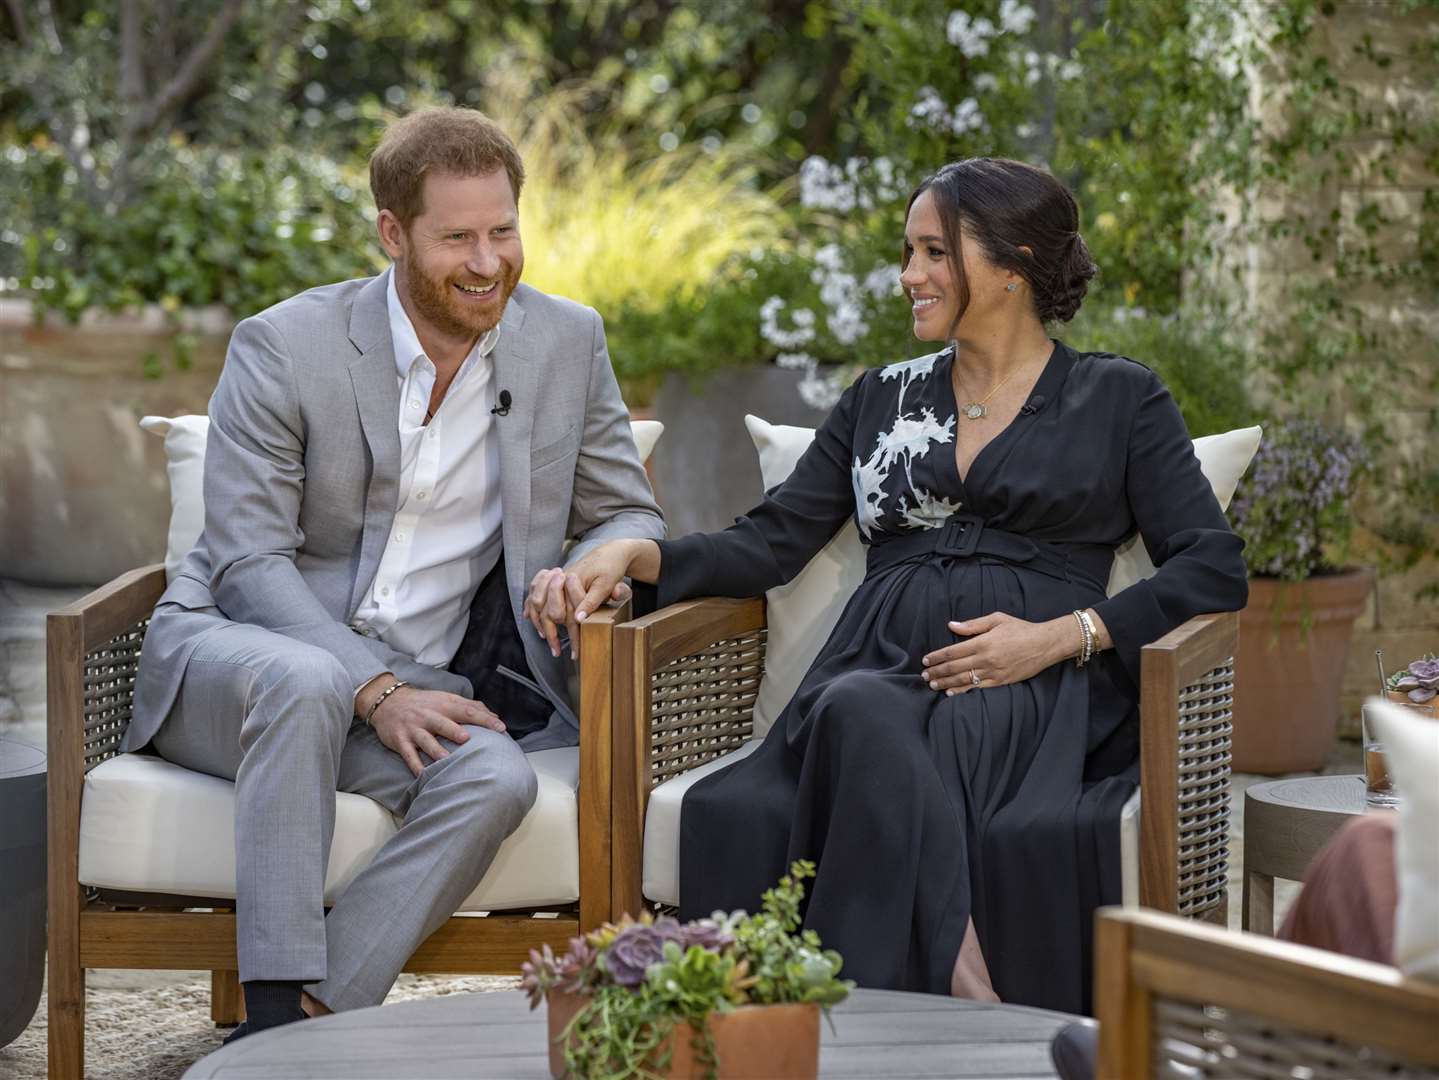 Harry and Meghan talked candidly during their interview (Harpo Productions/Joe Pugliese)